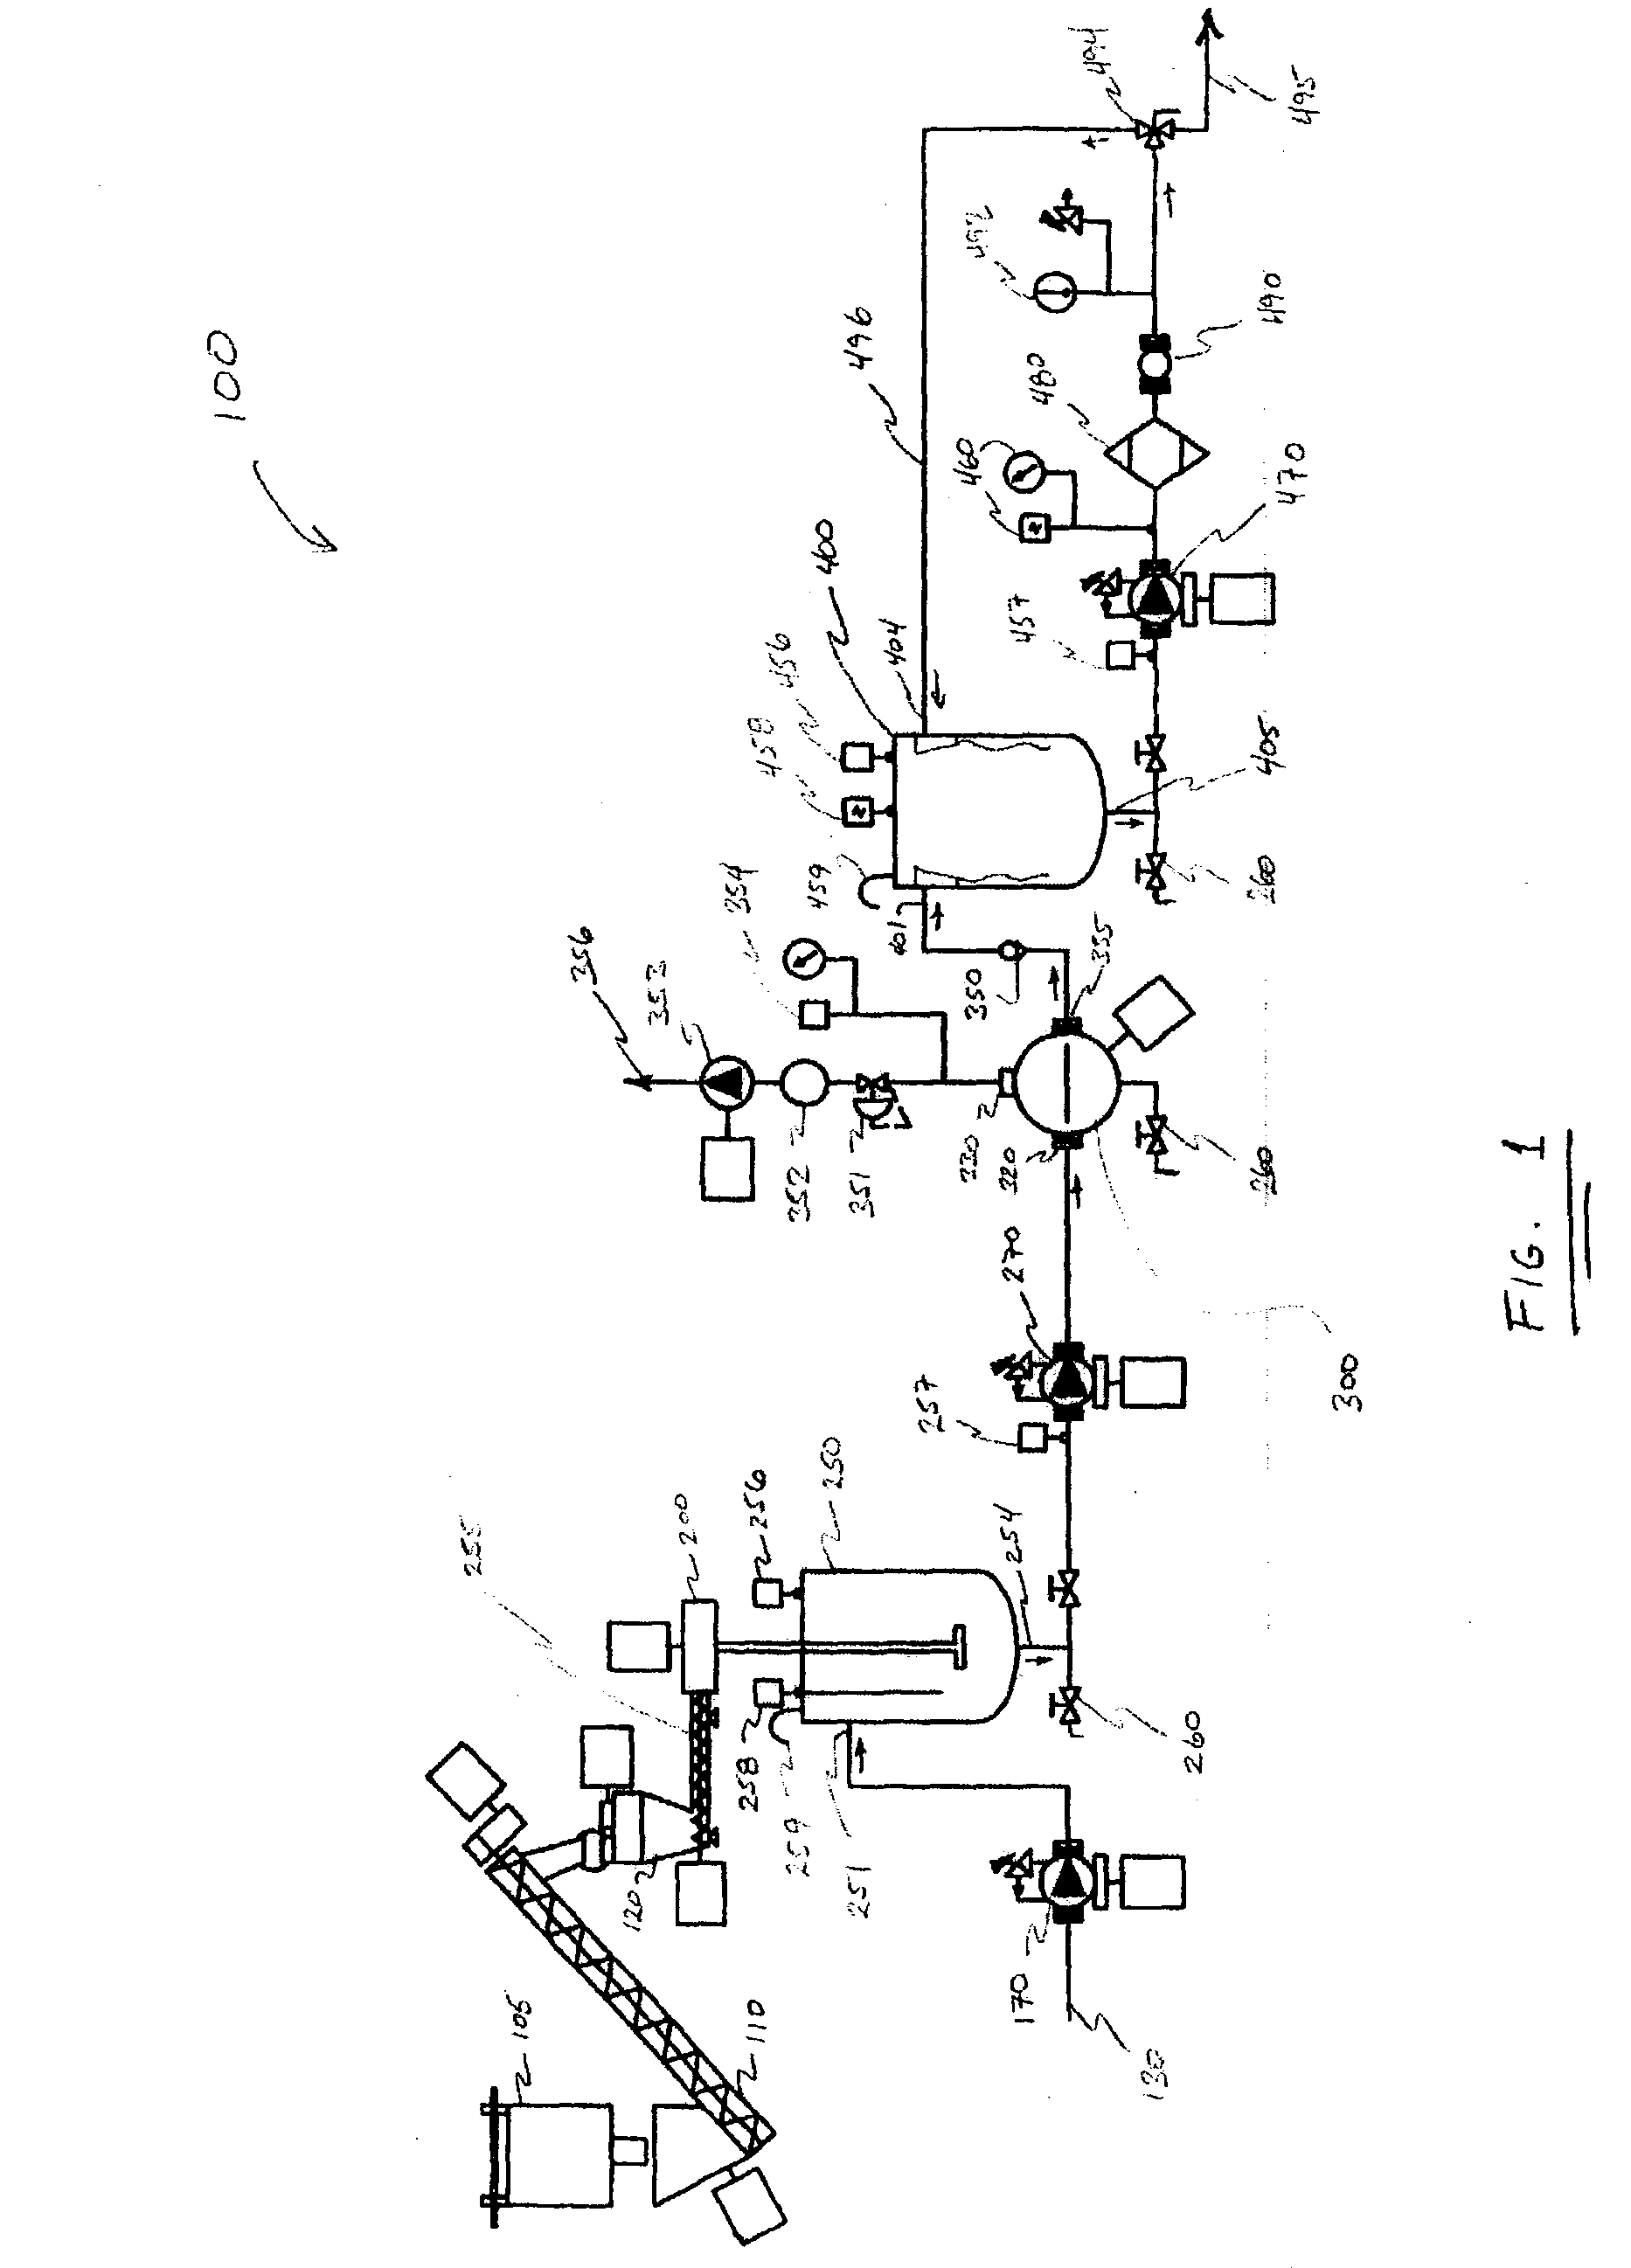 Apparatus and method for continuously removing air from a mixture of ground polyurethane particles and a polyol liquid